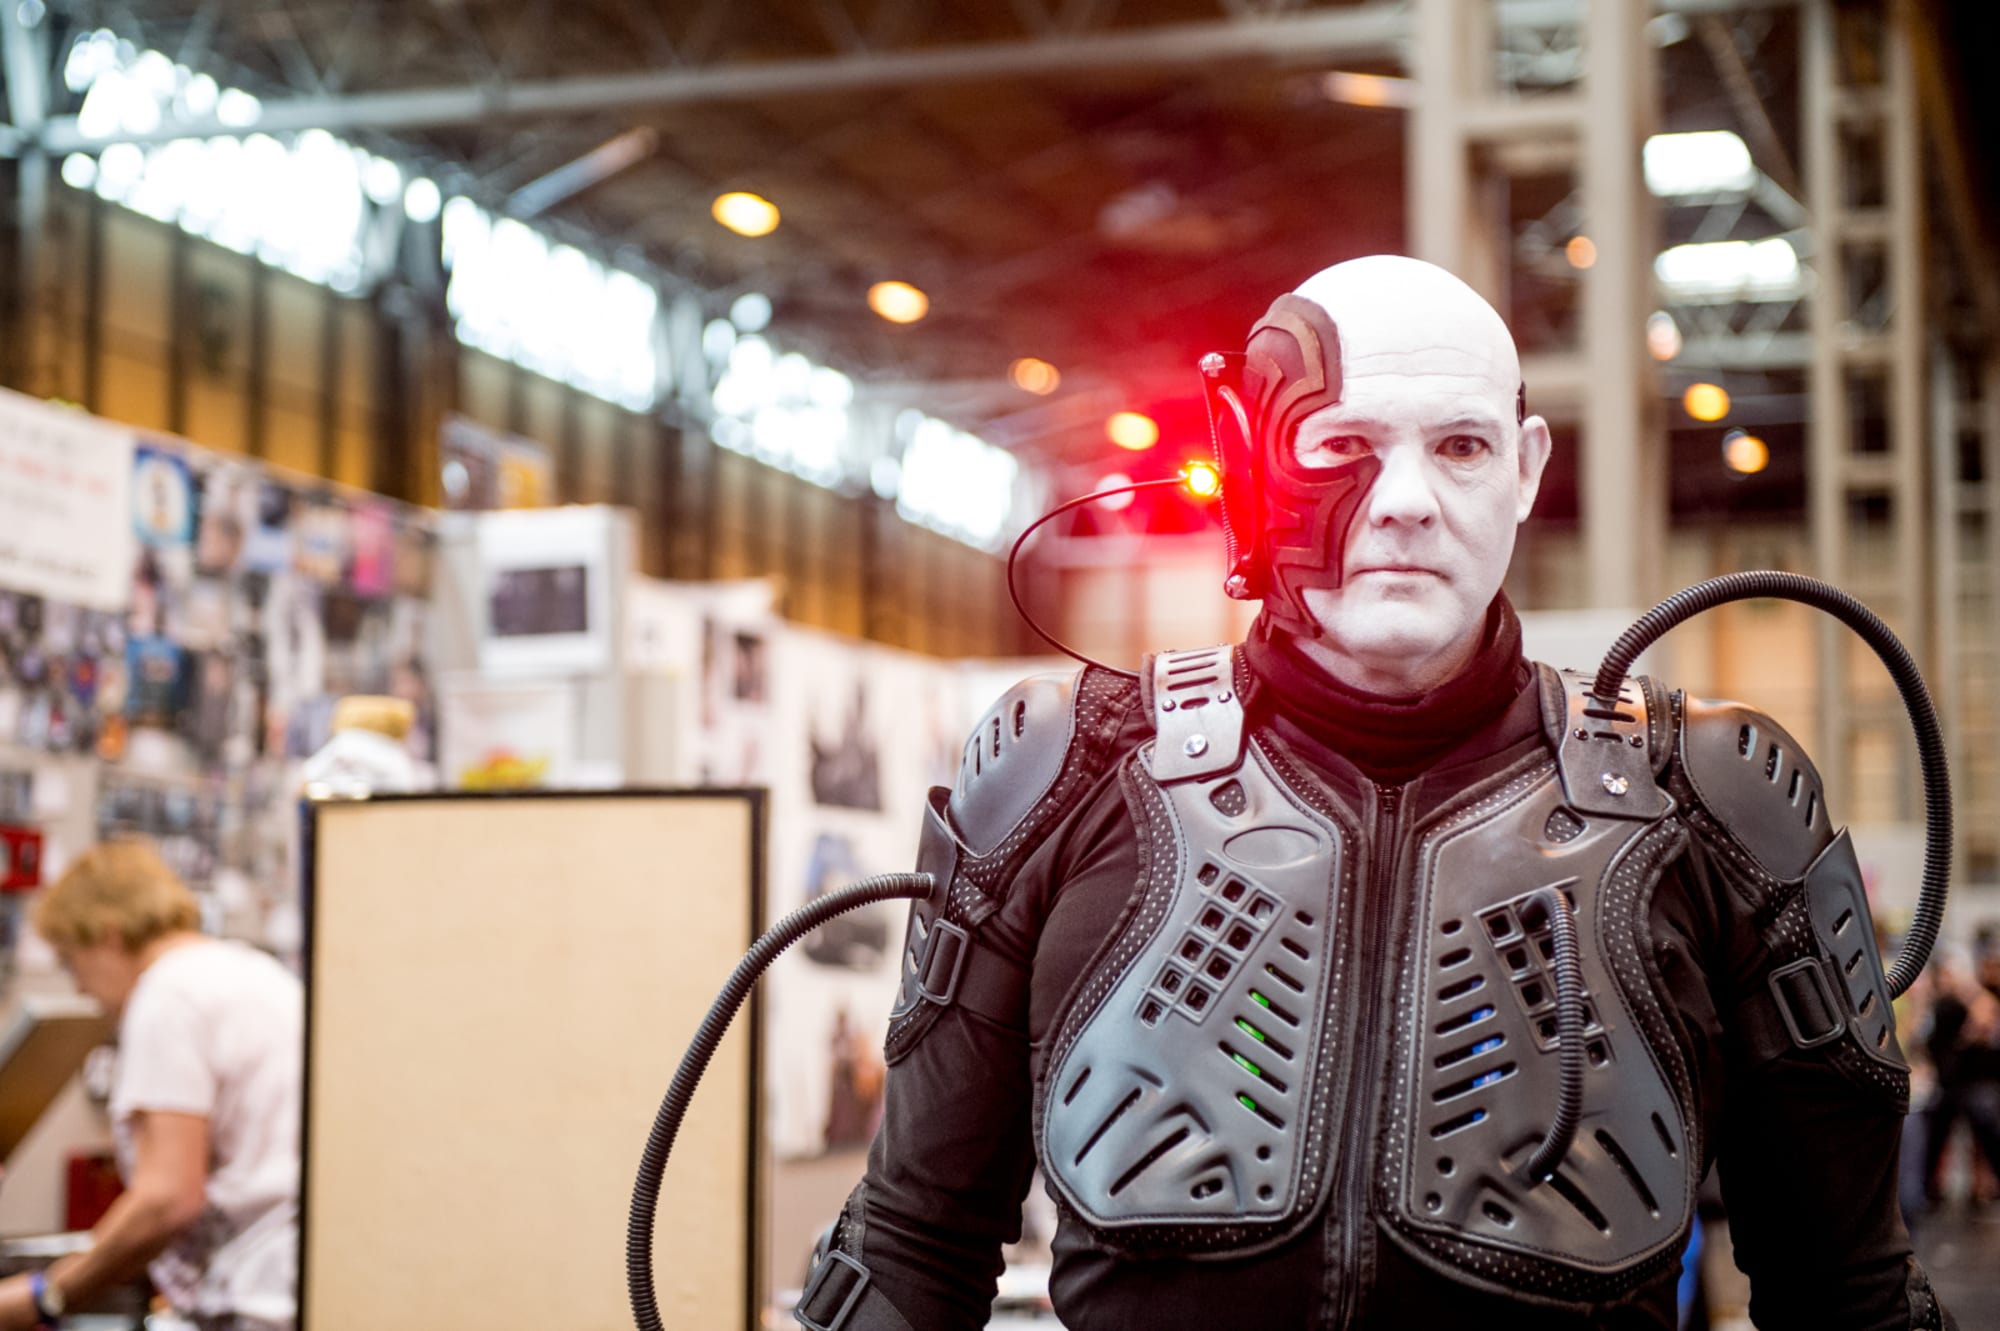 The Borg have halted the storyline from TNG's "Conspiracy"